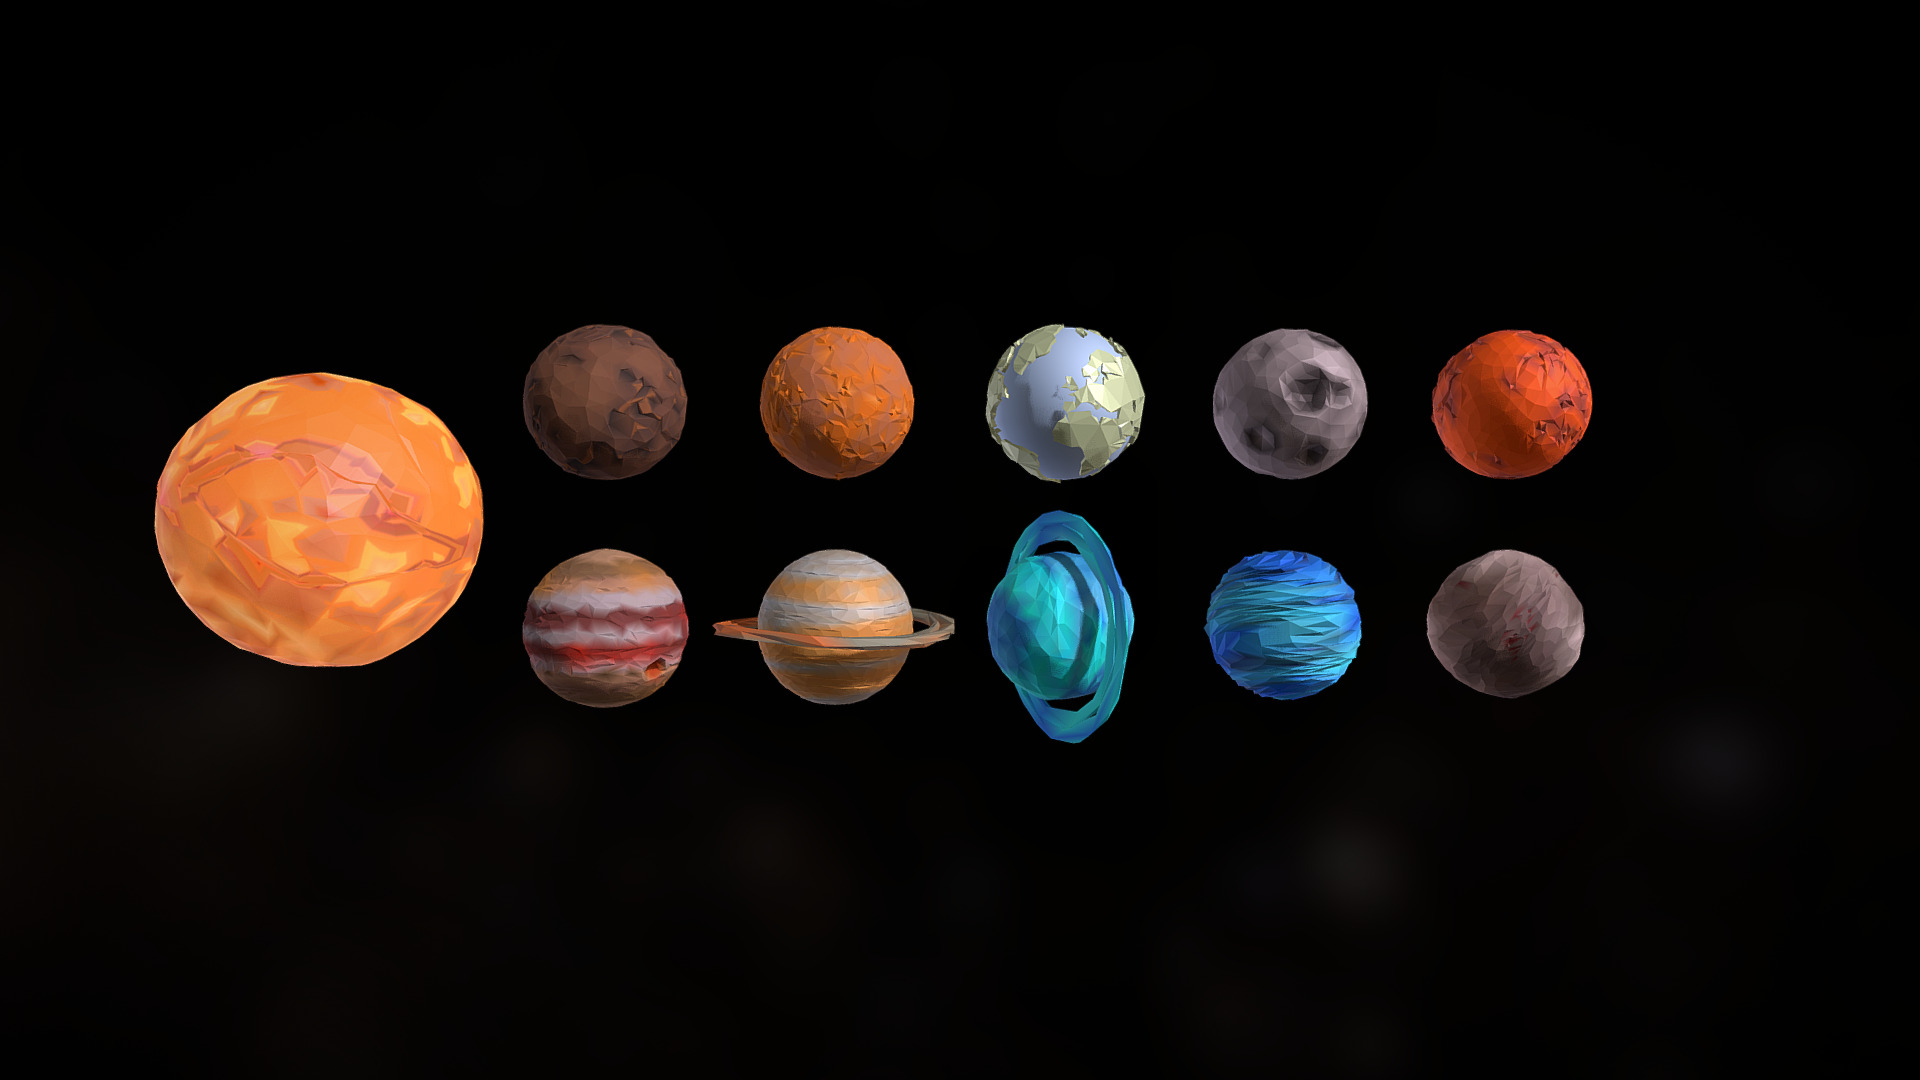 3D model [M]Lowpoly Solar System - This is a 3D model of the [M]Lowpoly Solar System. The 3D model is about a group of planets in space.